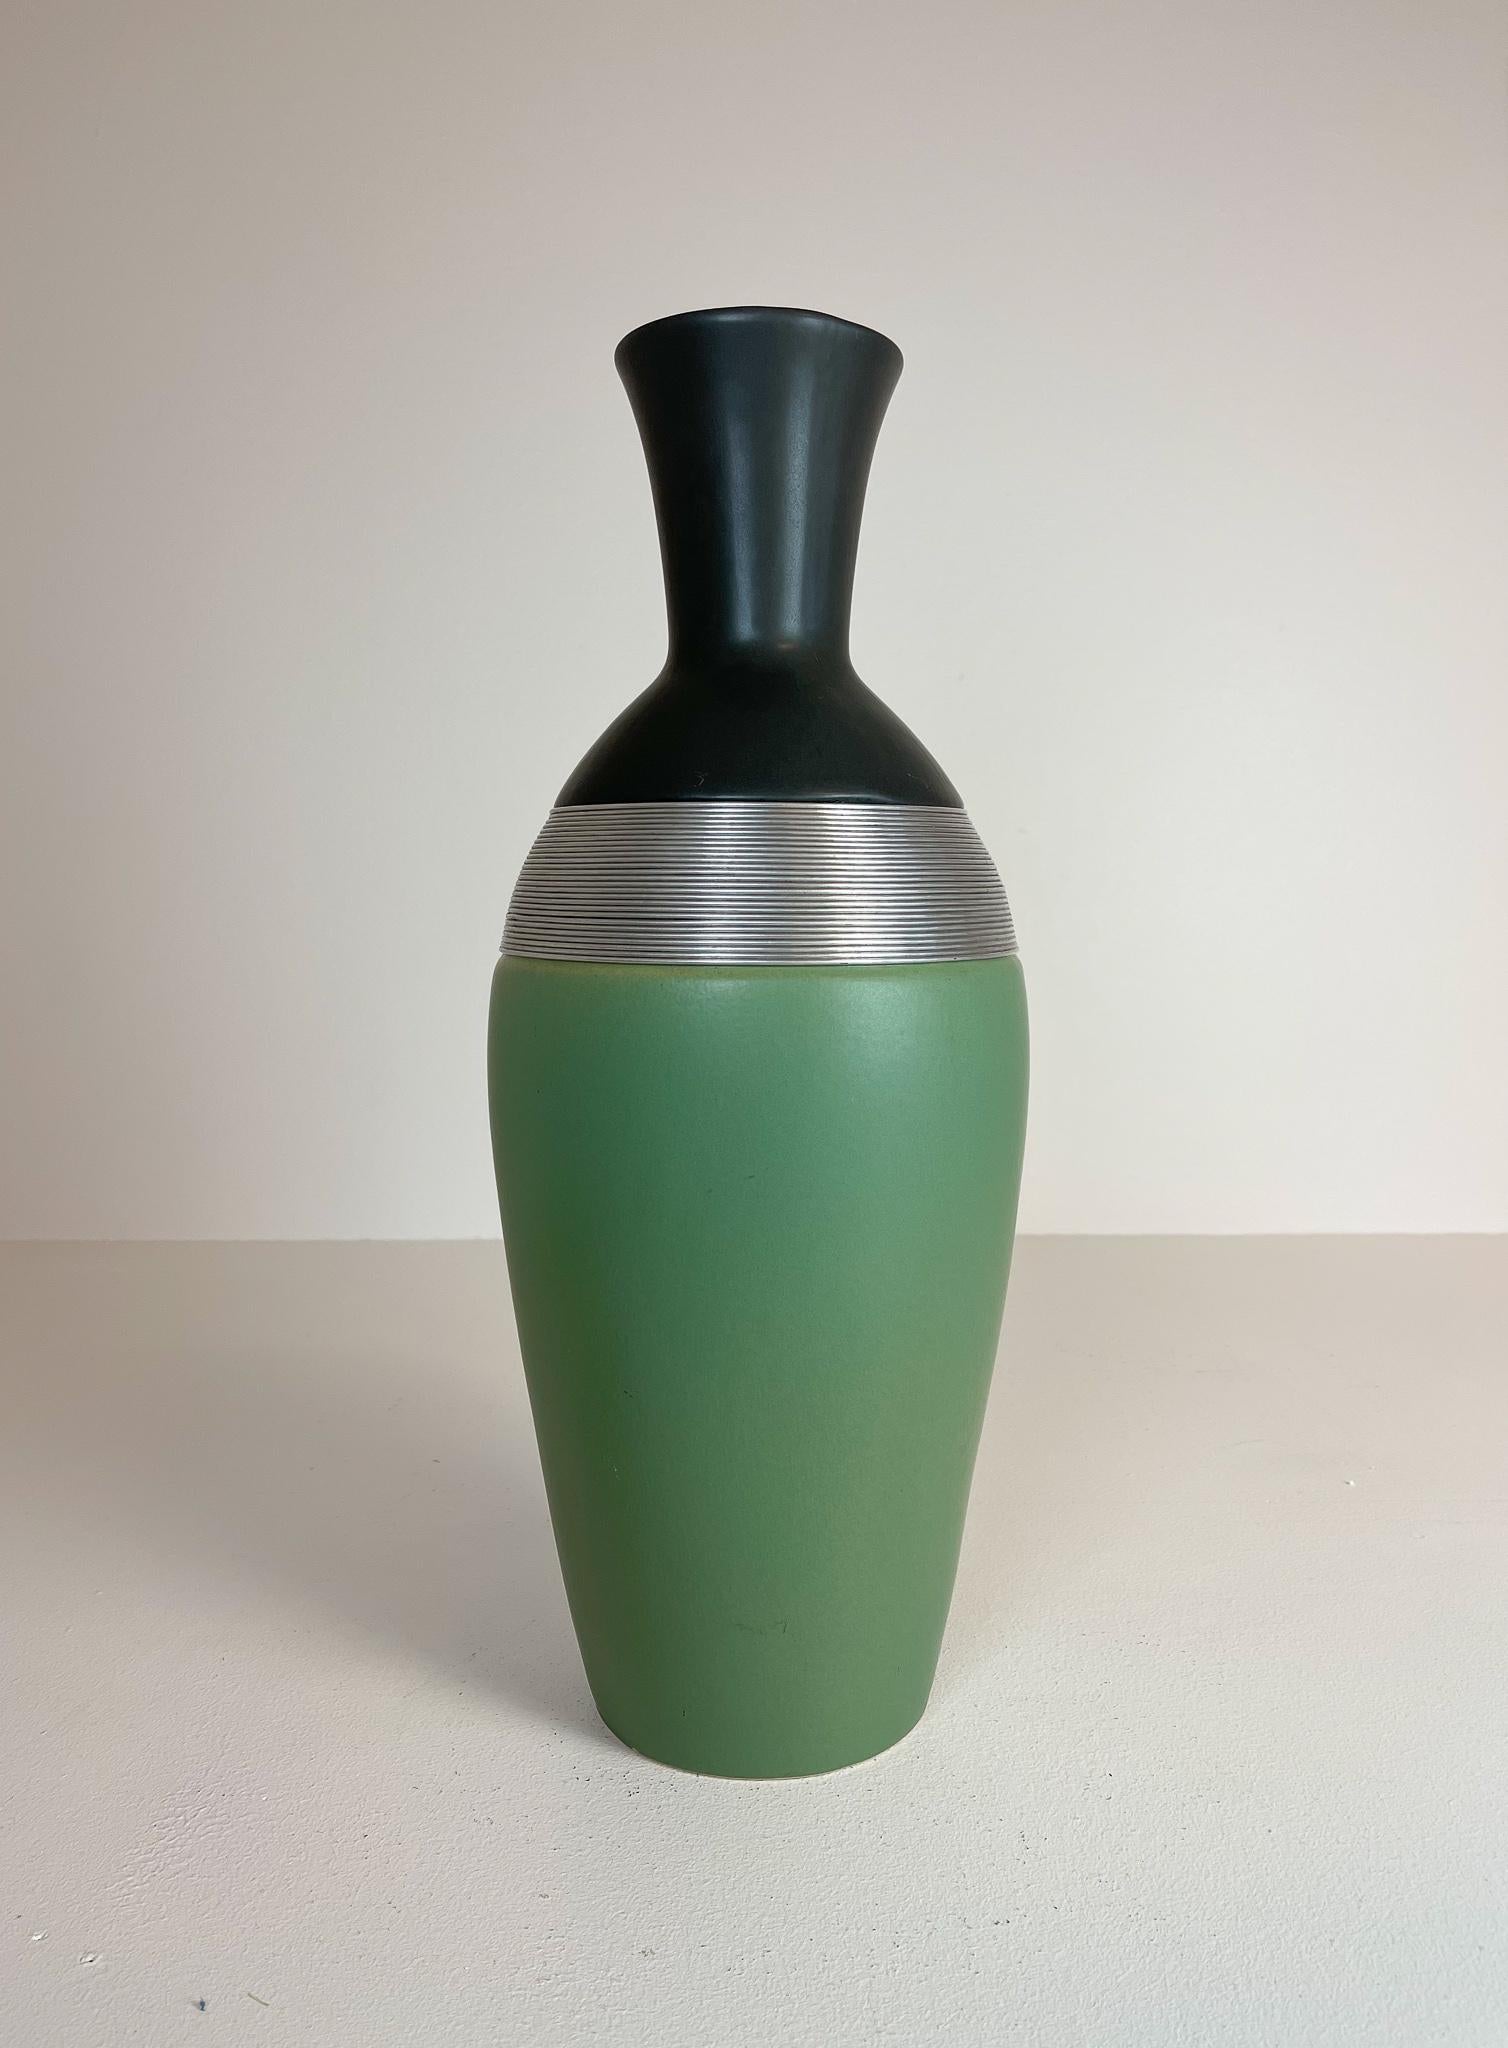 This large floor vase in Art Deco style has a mate green color with metal threads leading up to a black top. 

Good vintage condition. 

Dimensions: H 52 cm D 22cm.
  